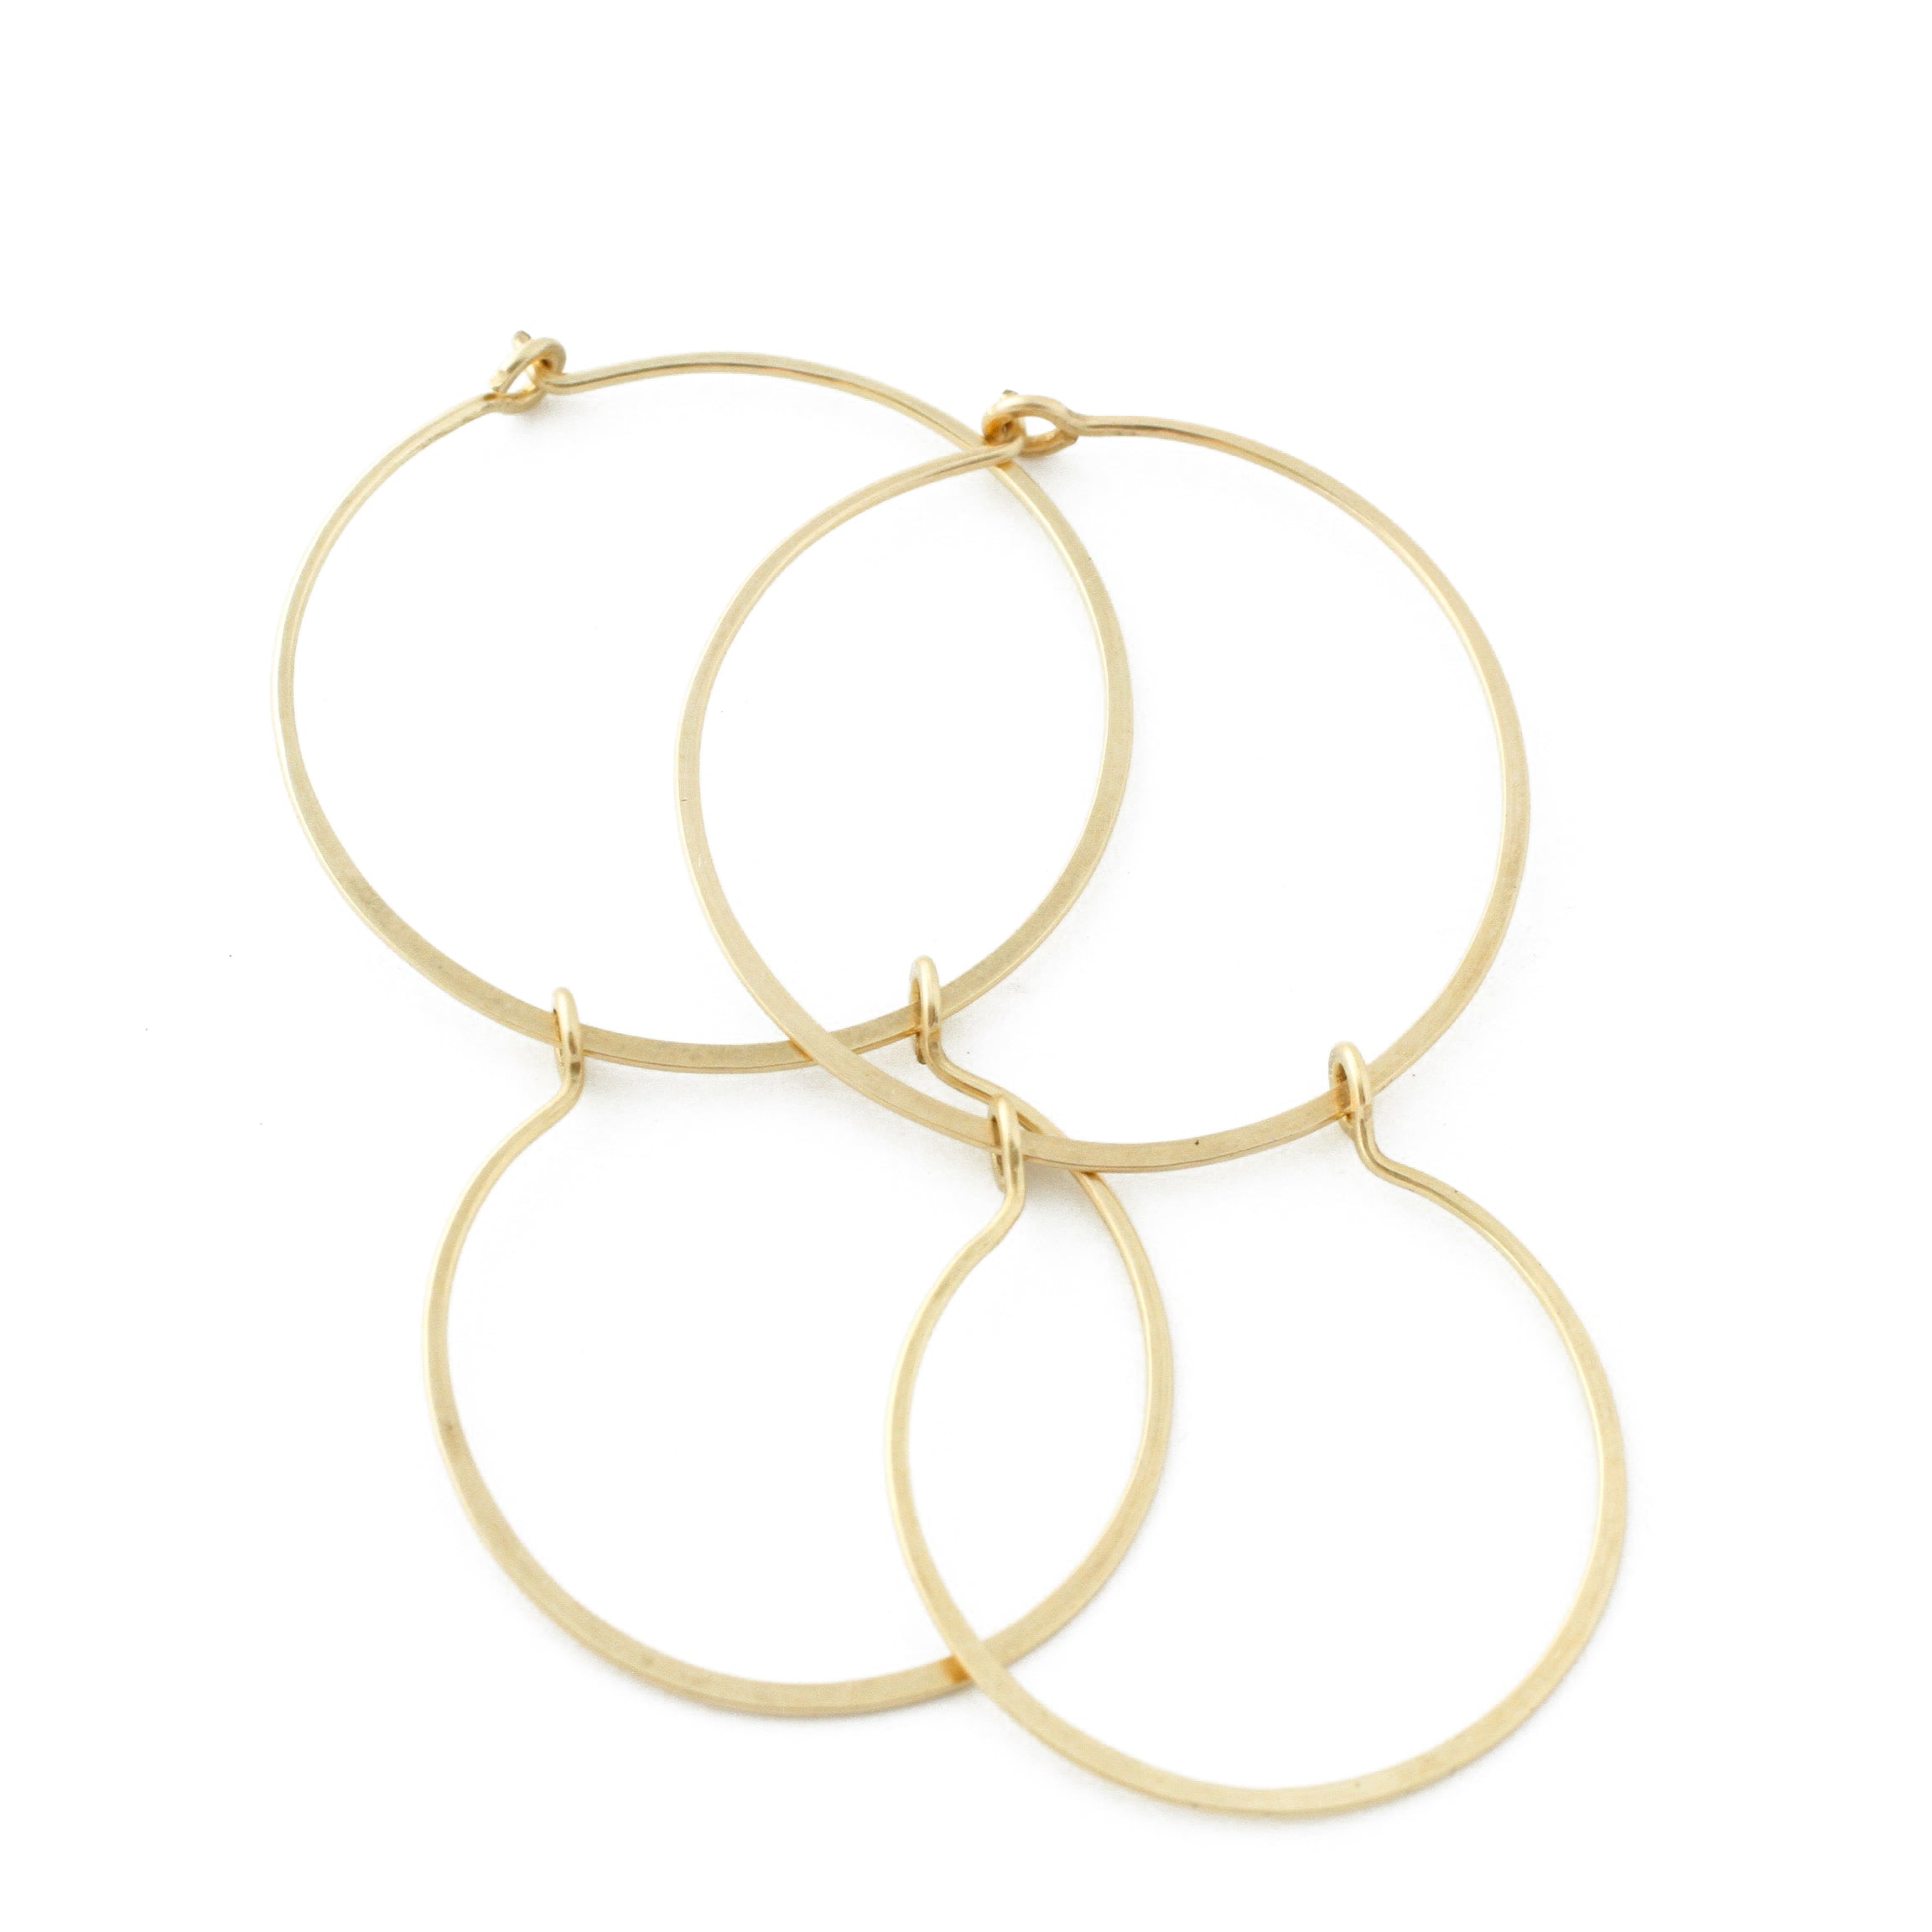 Double hoop earrings in gold-filled with a white background.